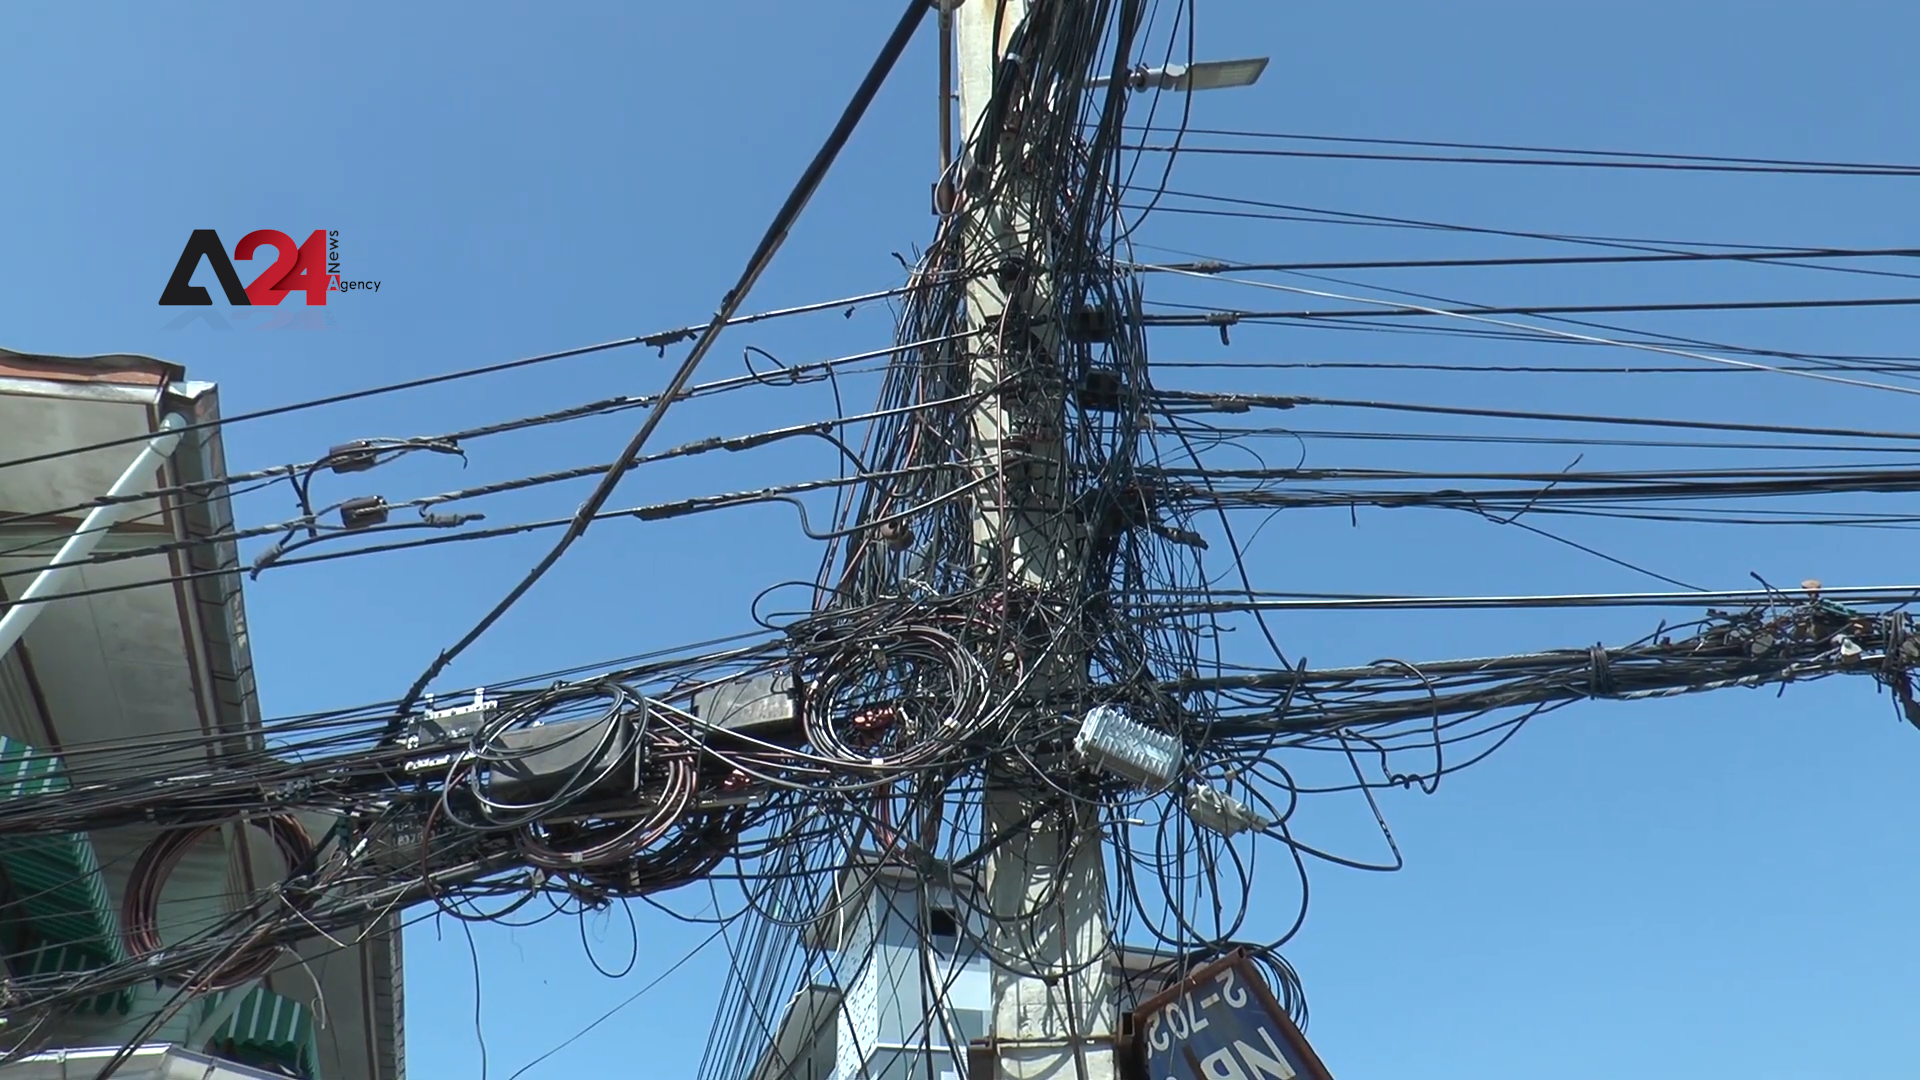 Thailand – Villagers of Bang Bo District suffer unregulated hazardous electricity poles